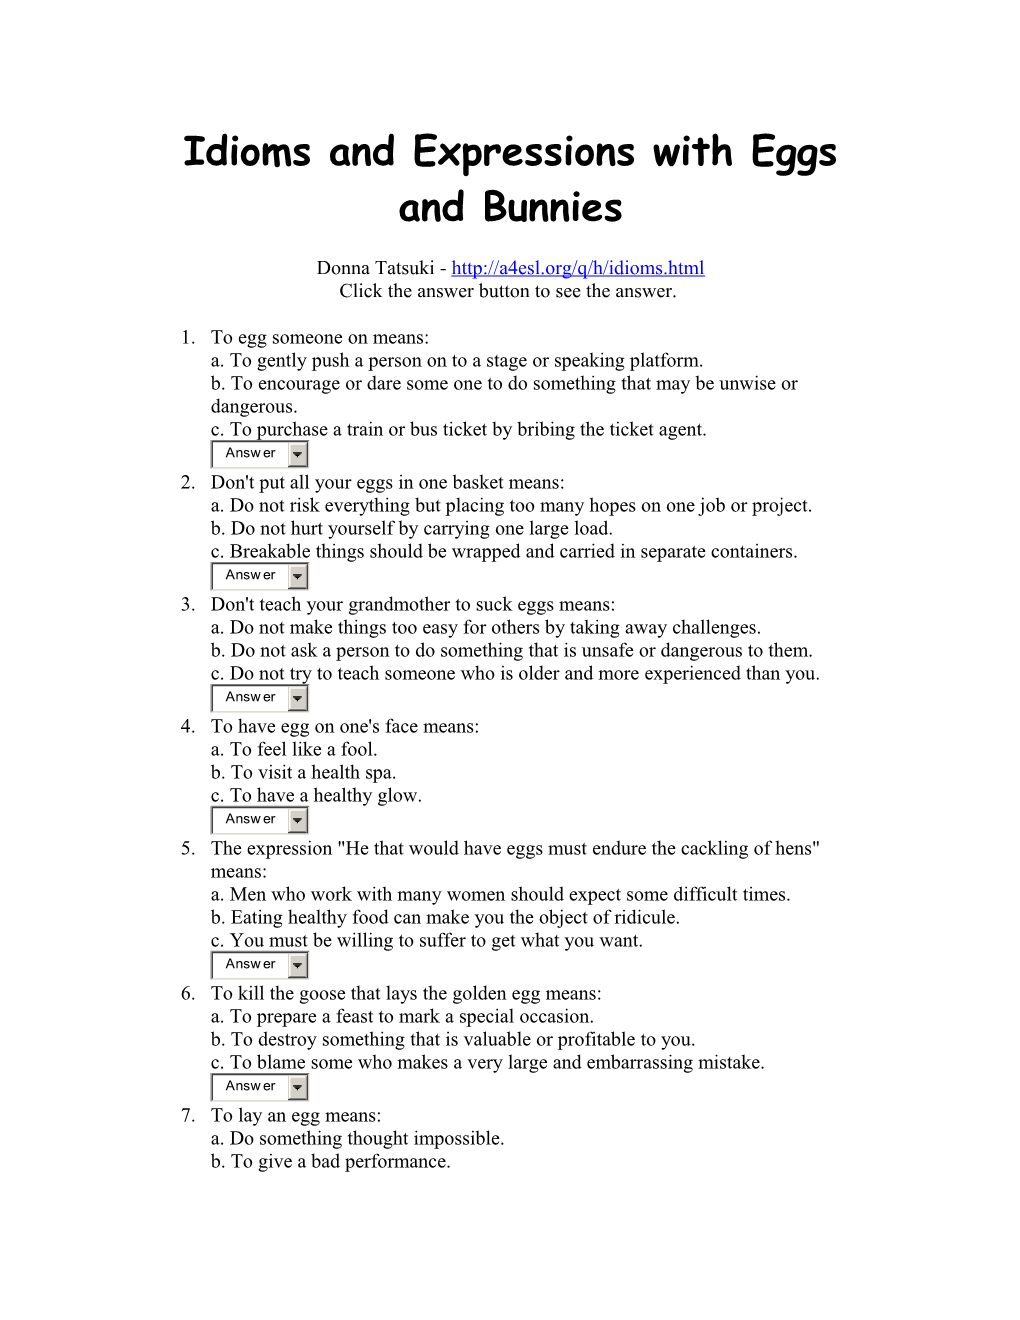 Idioms and Expressions with Eggs and Bunnies